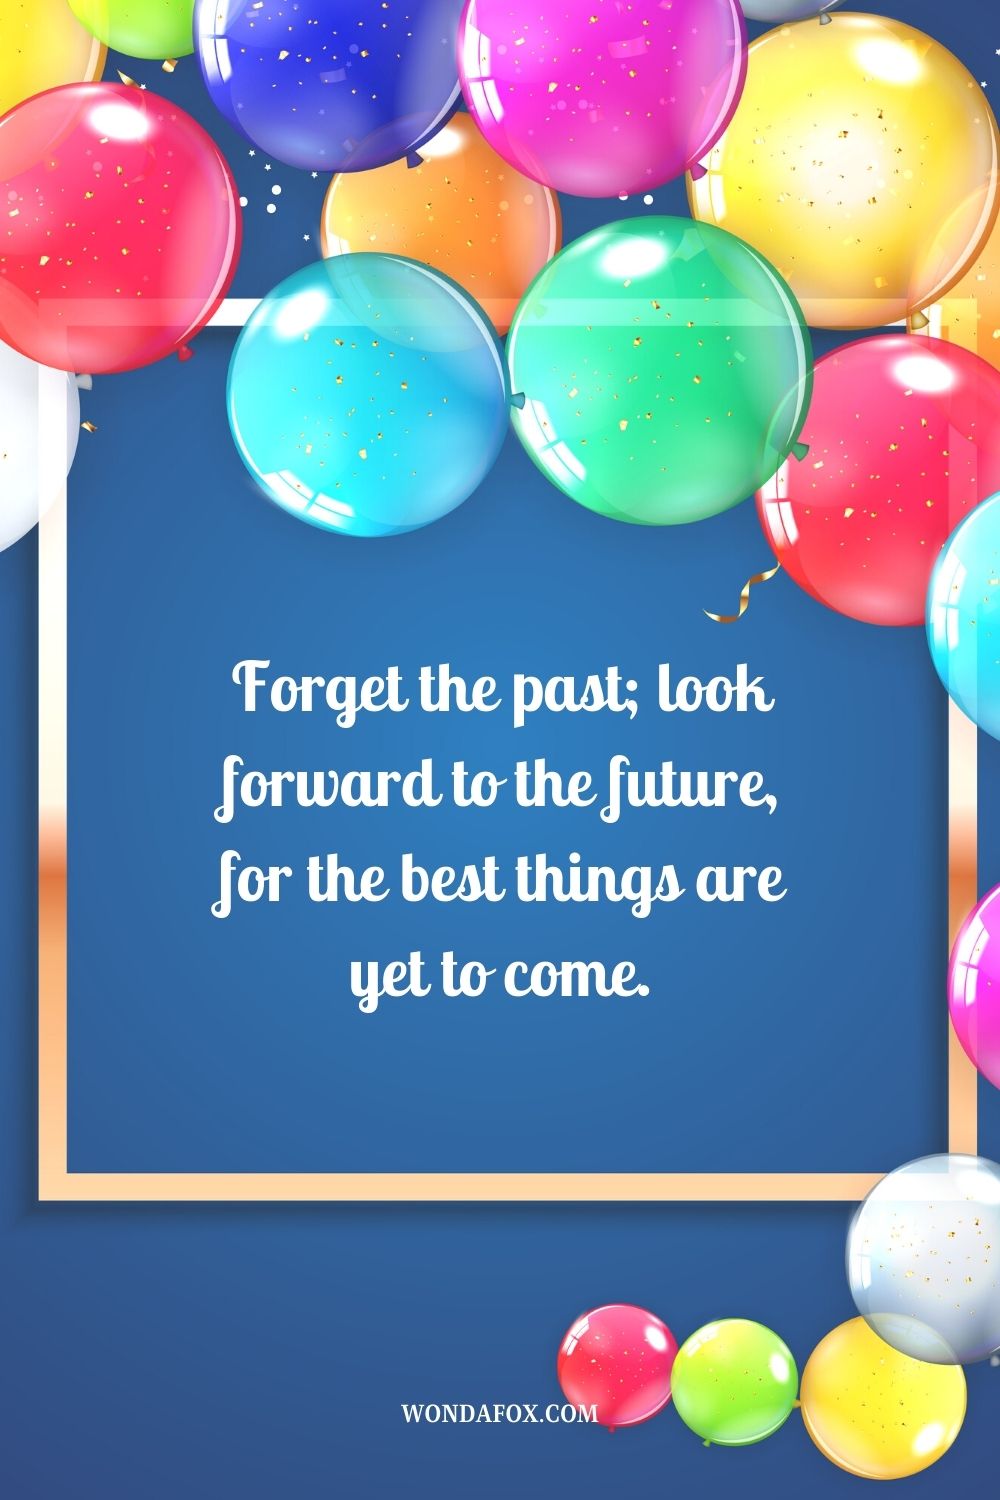 “Forget the past; look forward to the future, for the best things are yet to come.”